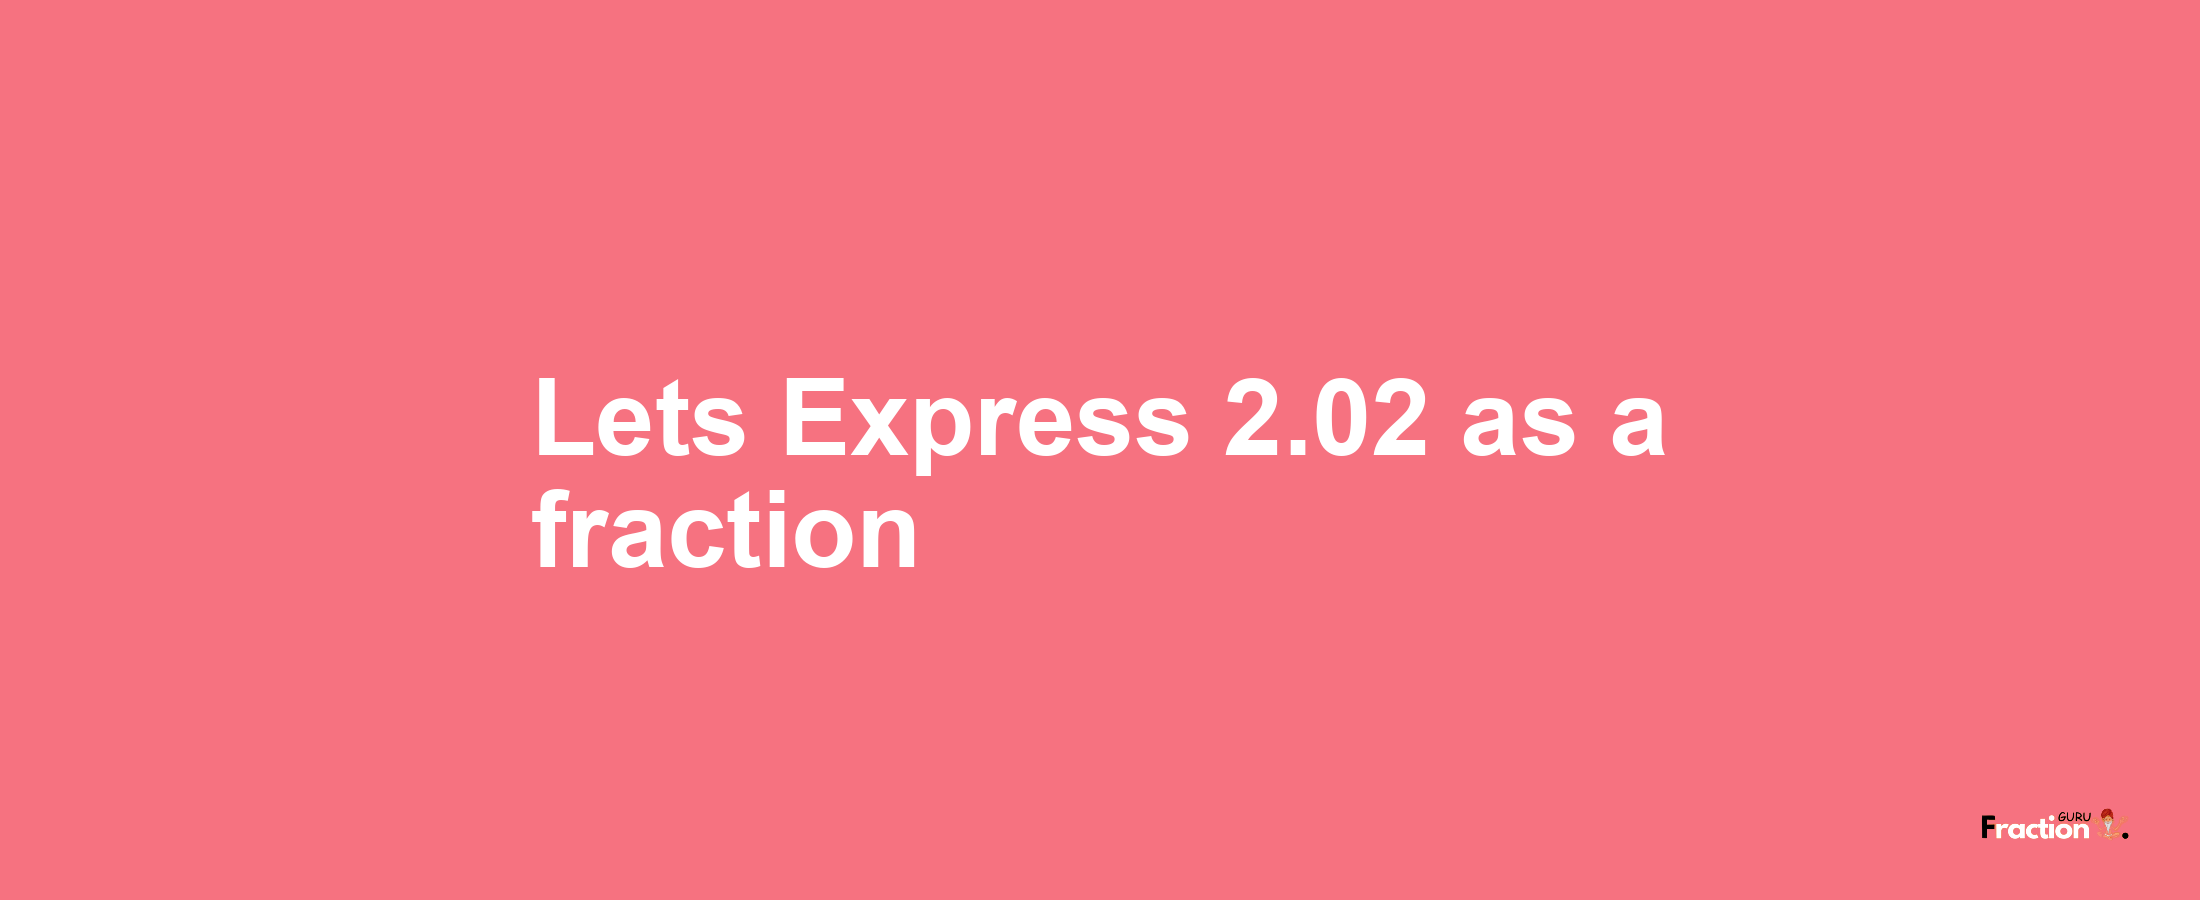 Lets Express 2.02 as afraction